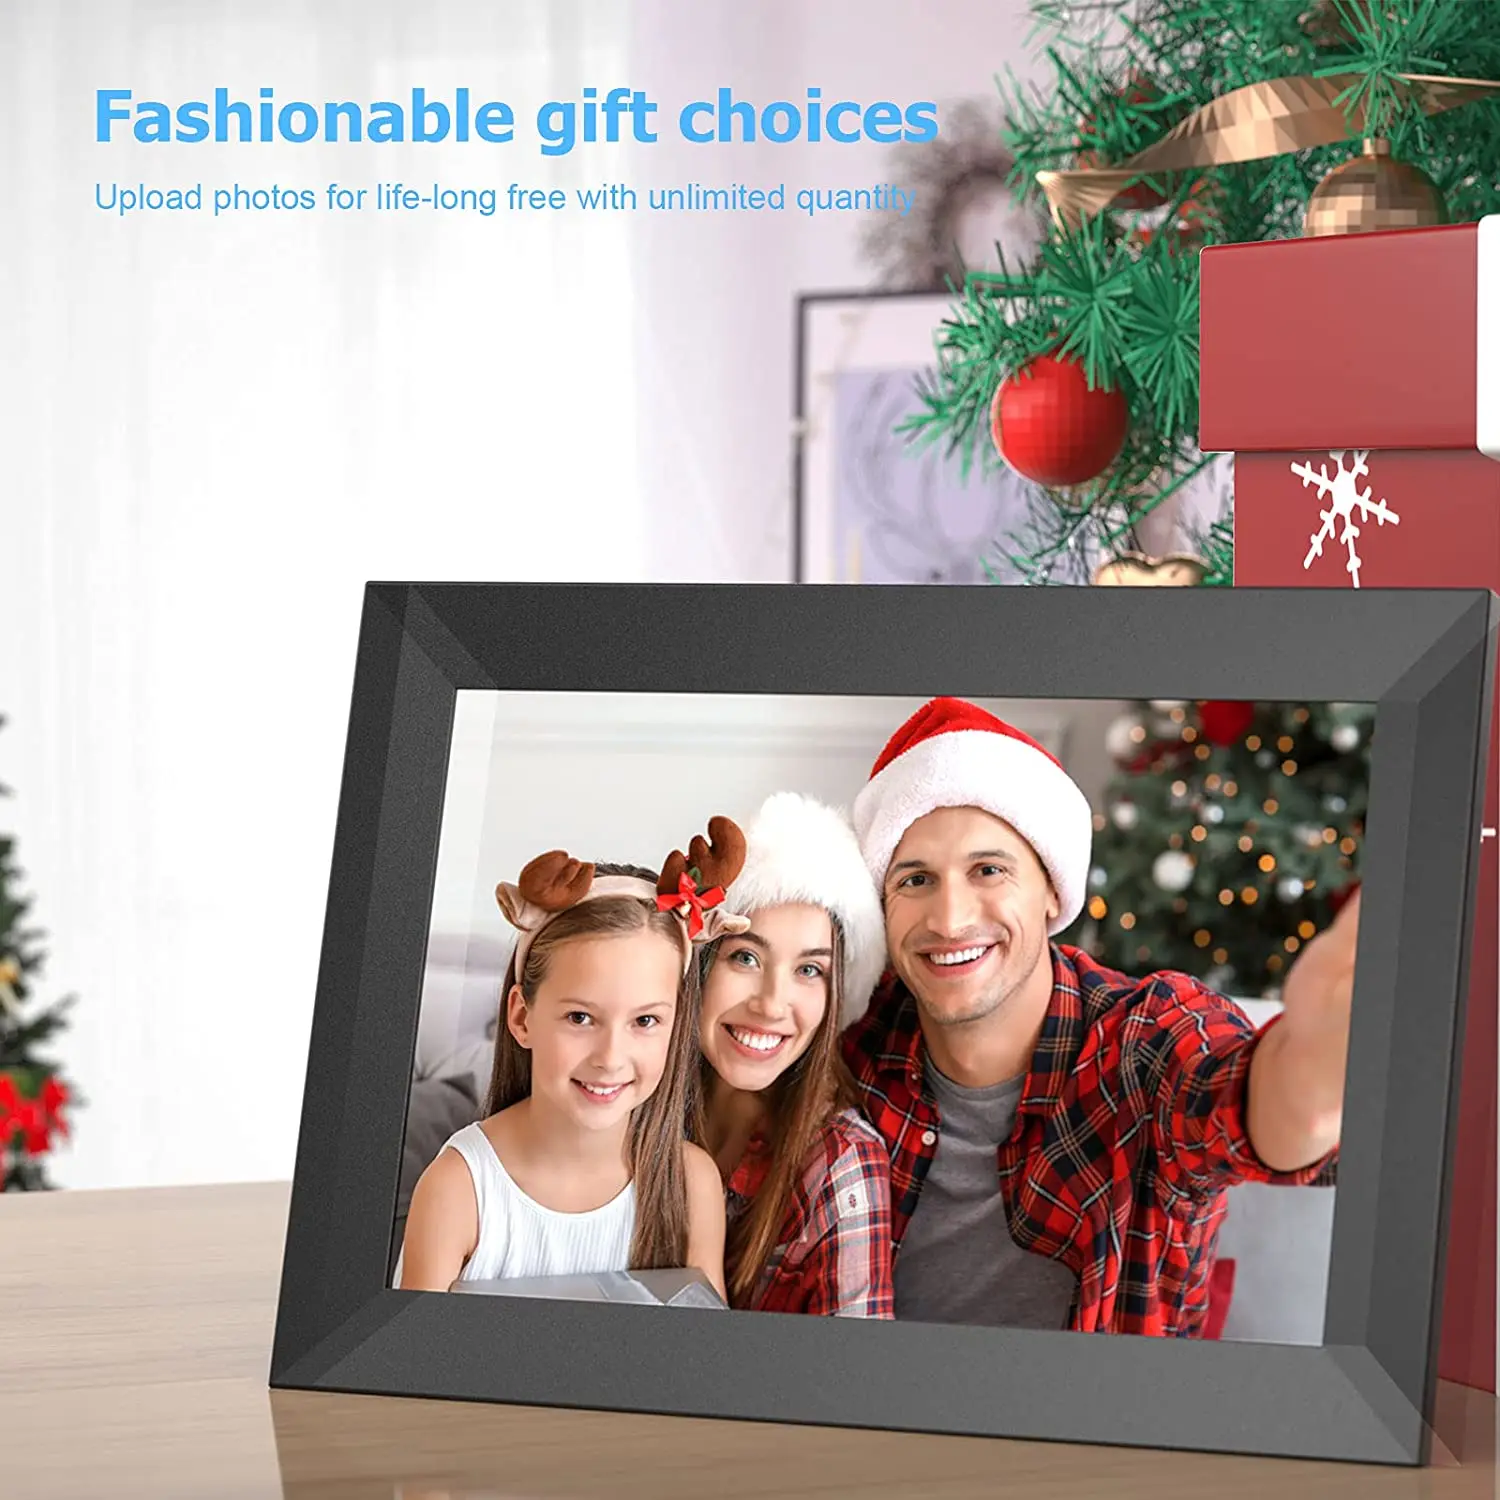 Digital Photo Frame WiFi 10.1Inch HD 1280x800 Touch Screen IPS Display 16GB Storage Auto Rotation with iOS & Android Frameo App images - 6